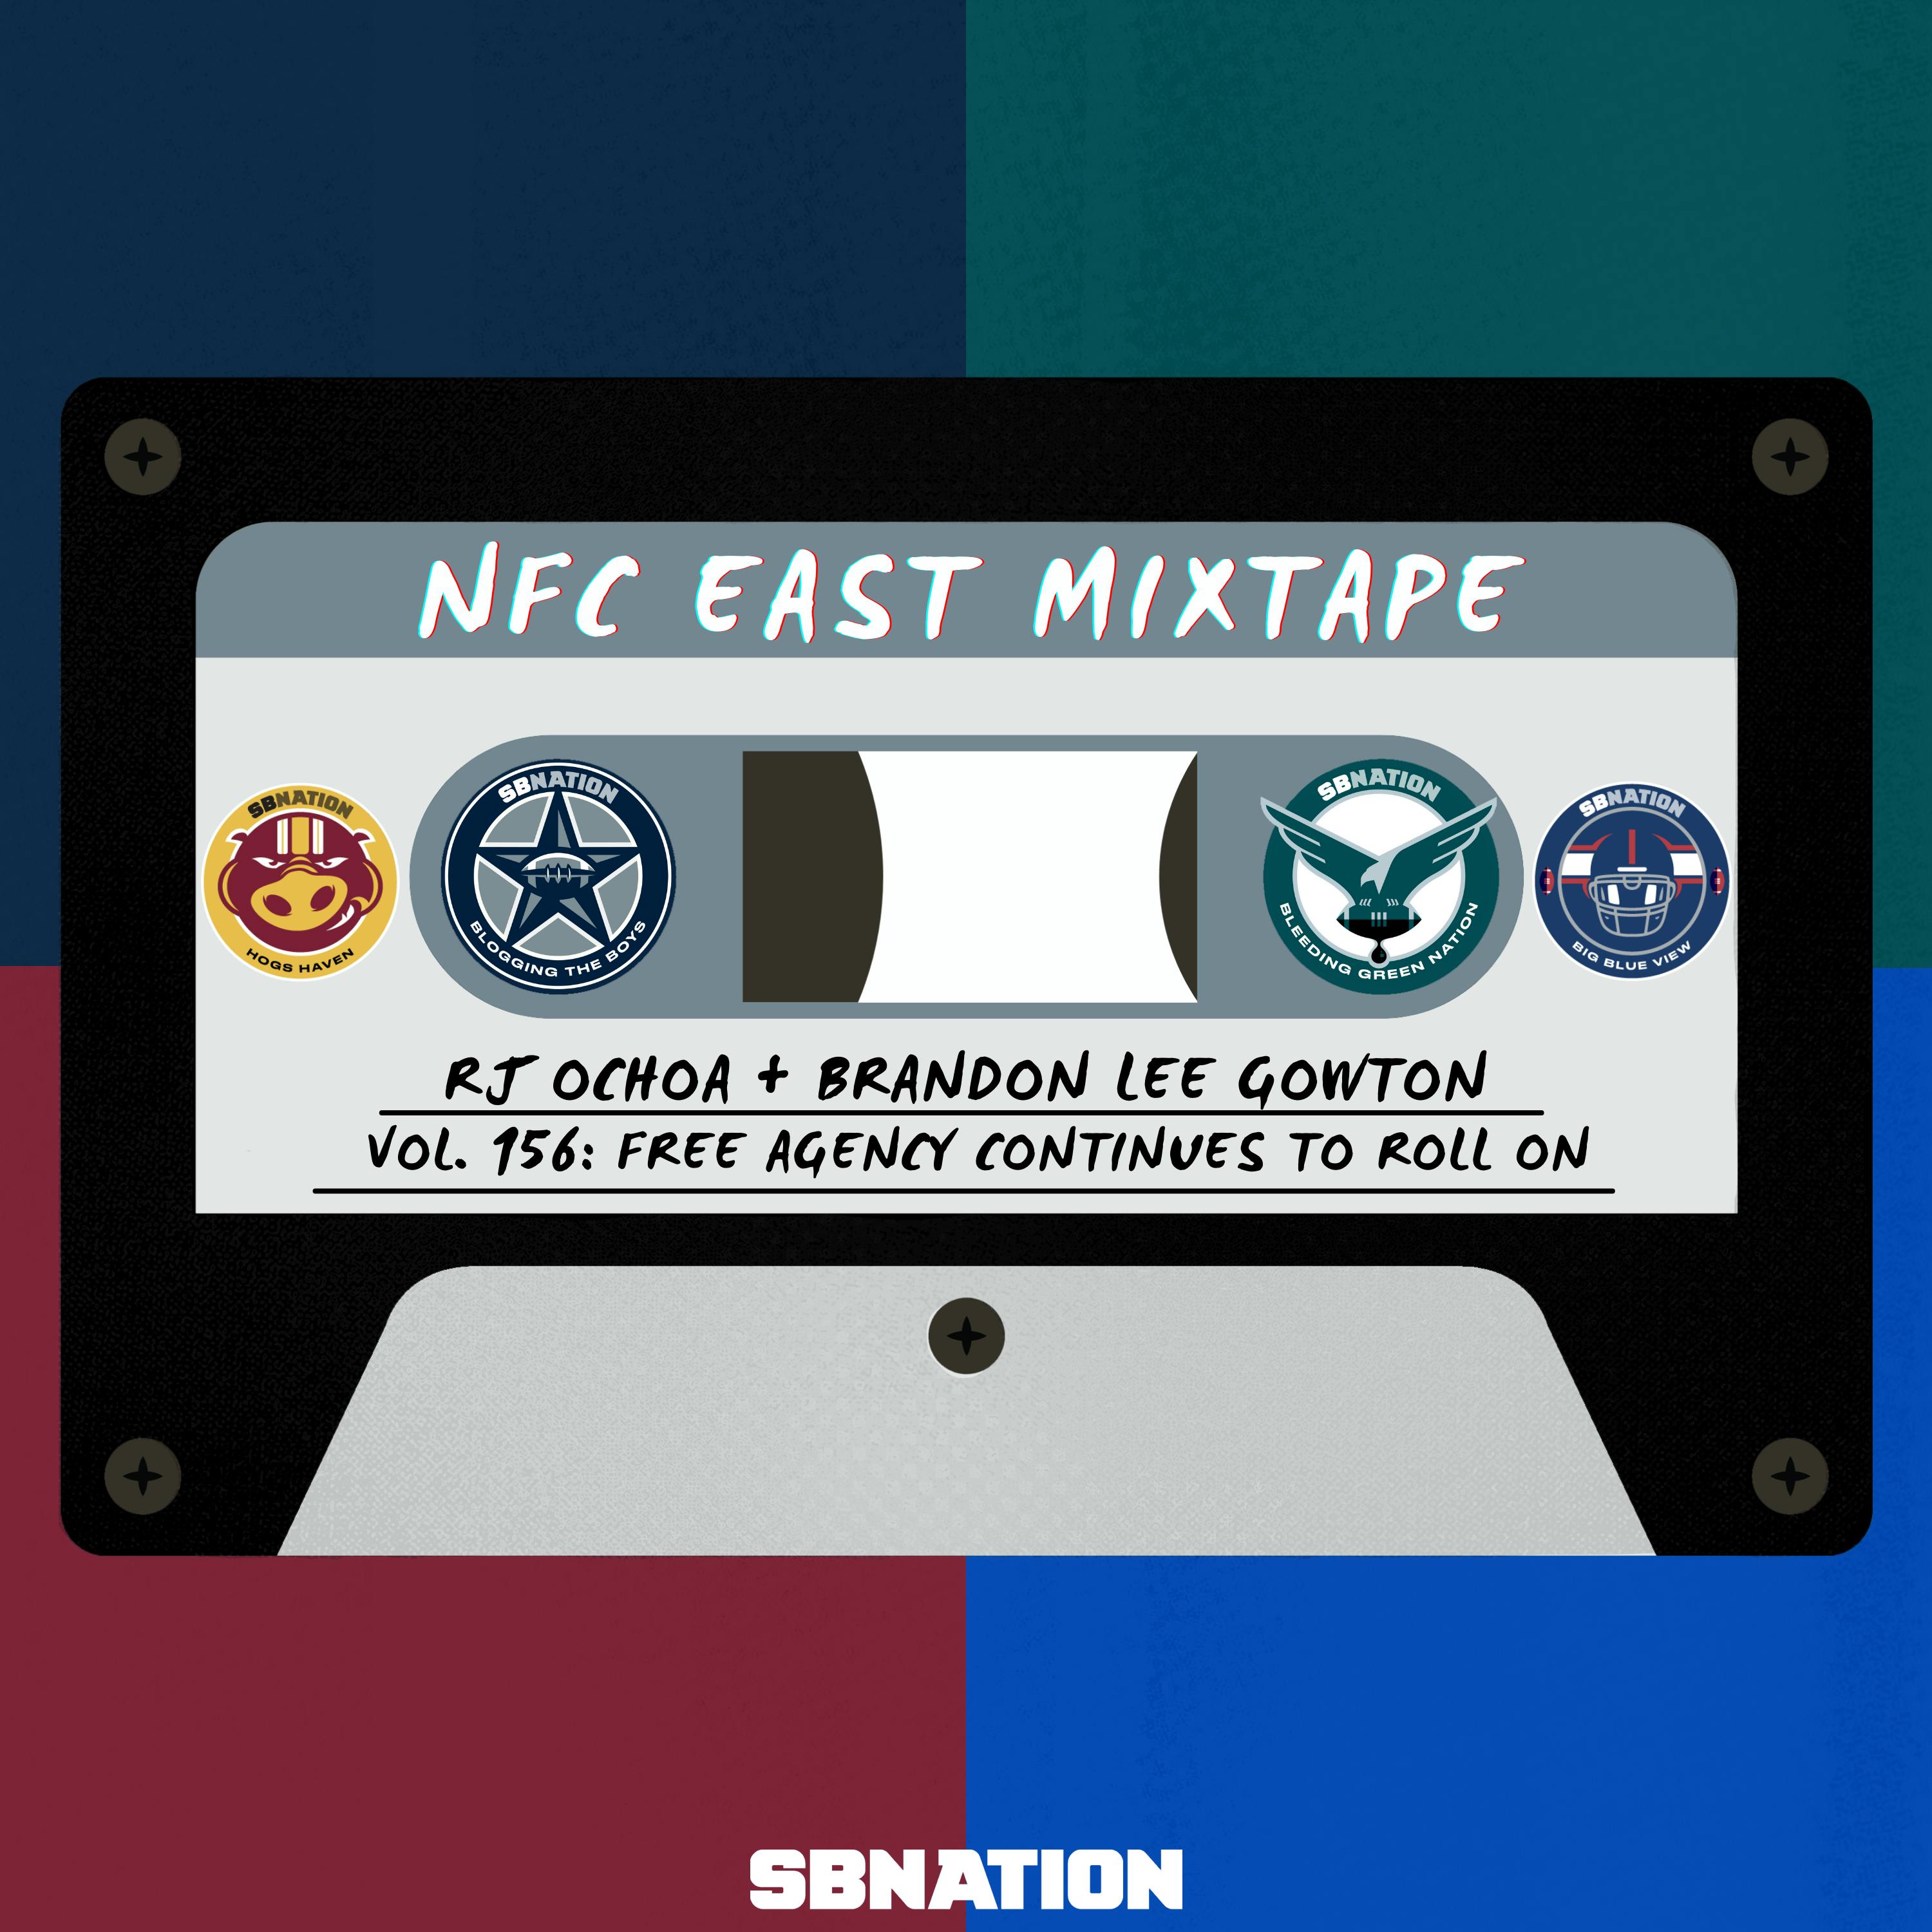 NFC East Mixtape Vol.156: Free Agency continues to roll on